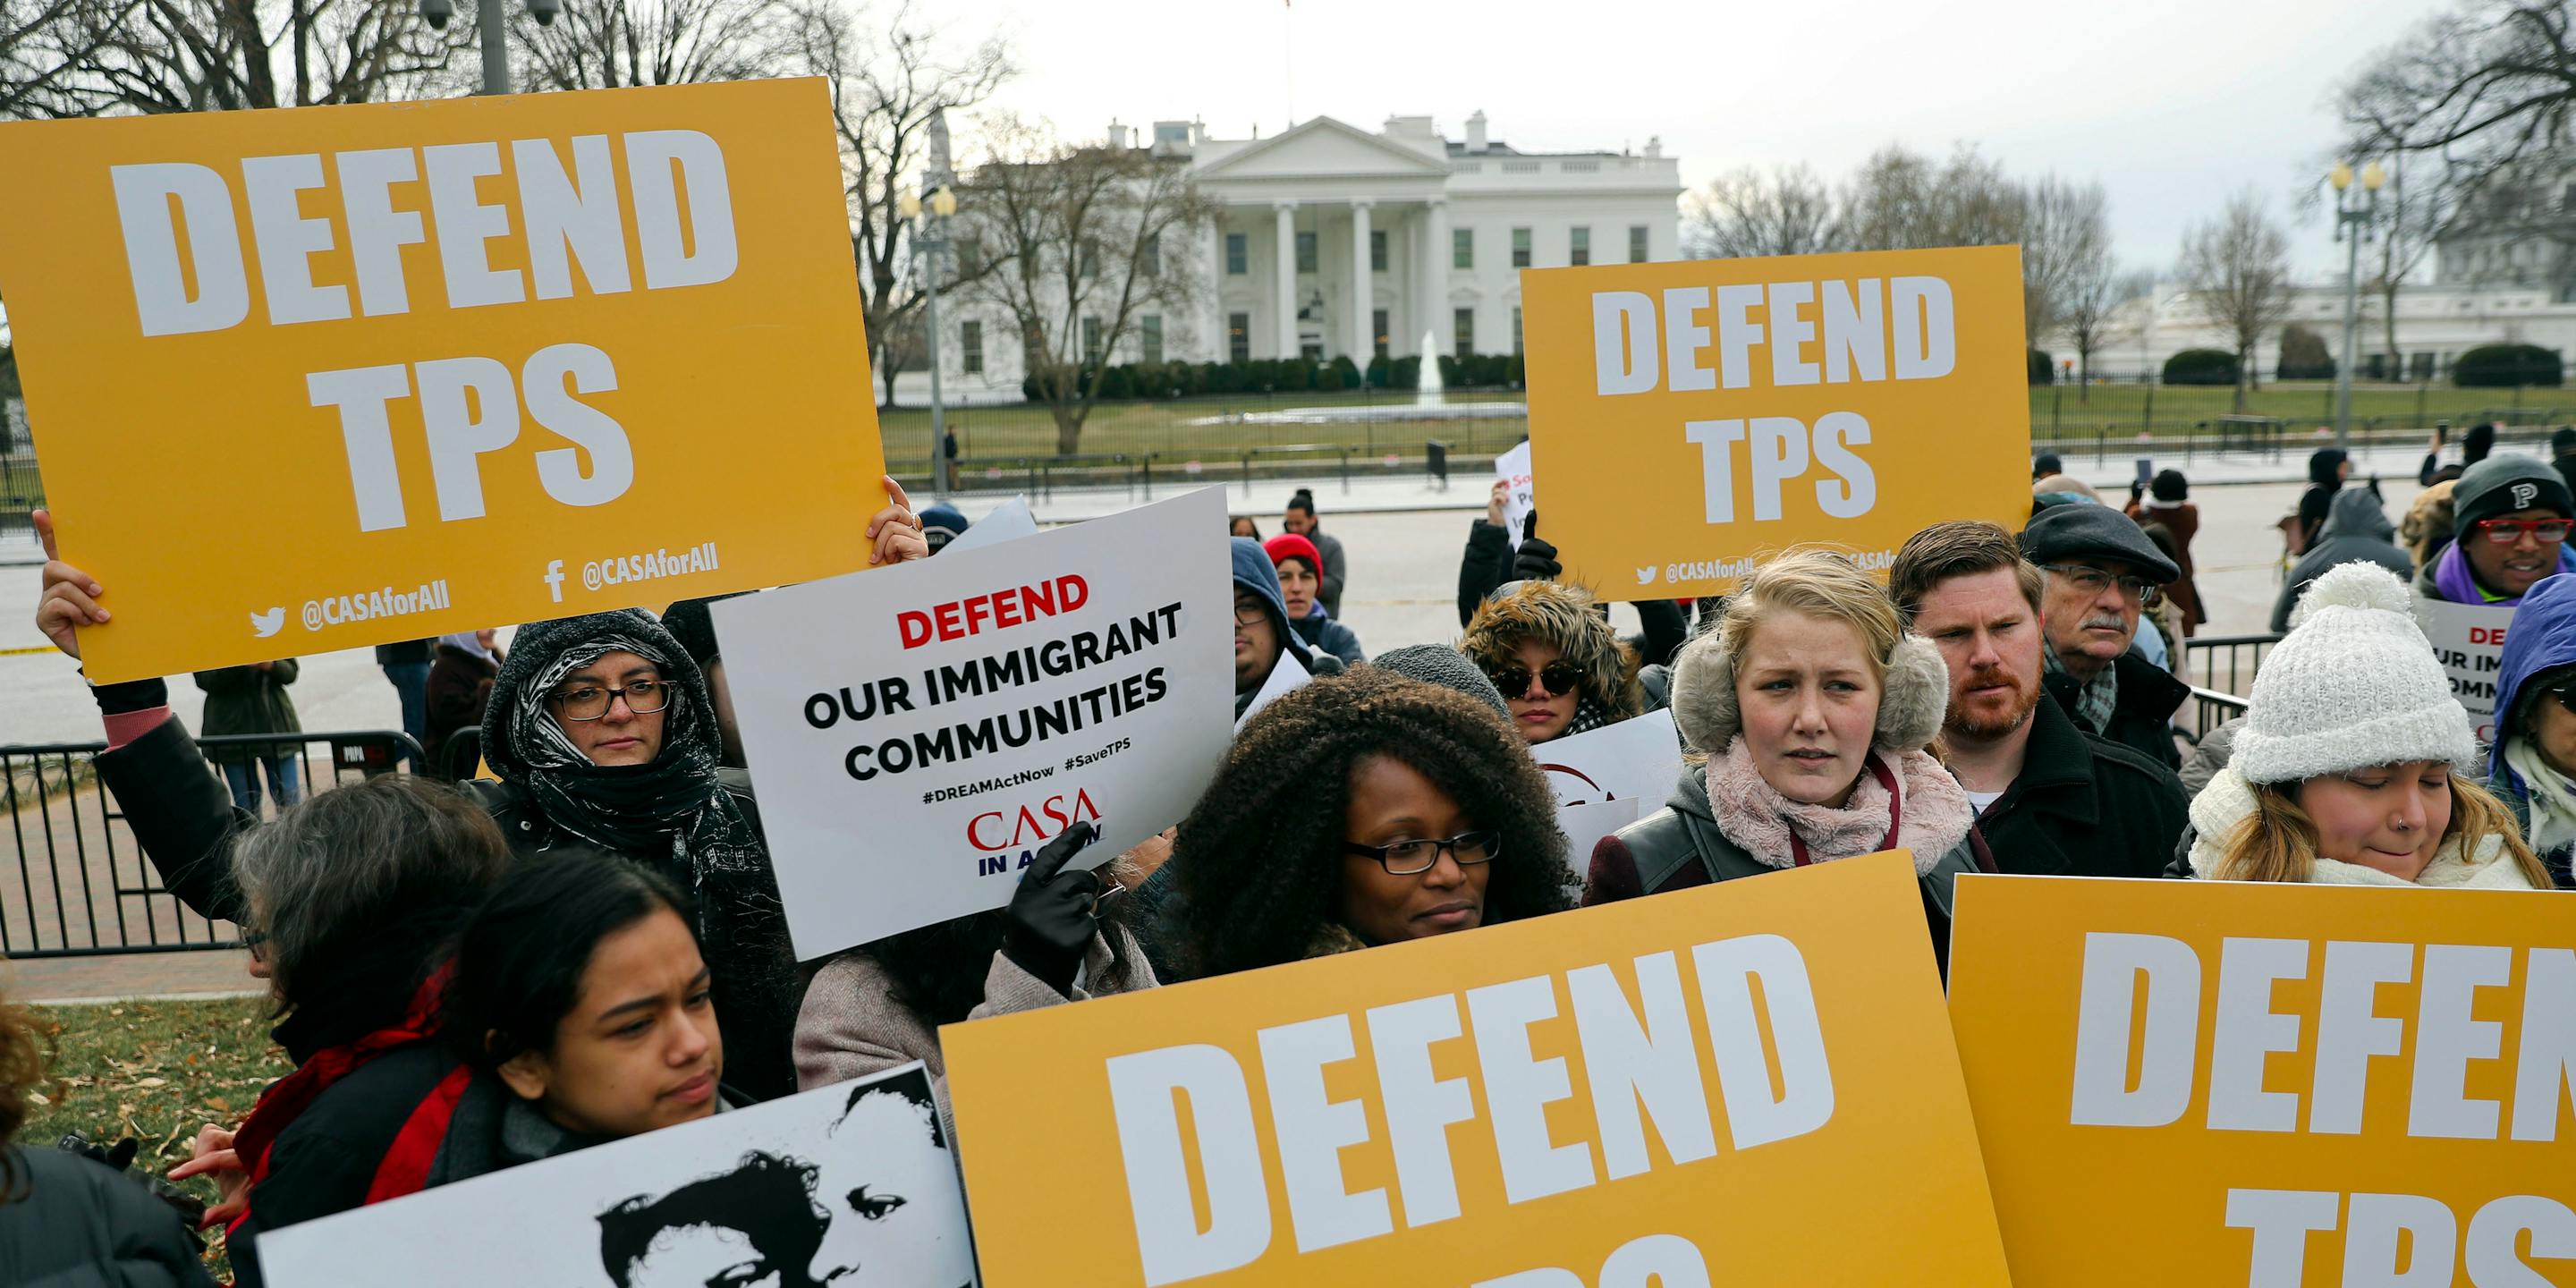 Trump's "Shithole Countries" Remark at Center of Lawsuit to Reinstate TPS  Protections for Immigrants